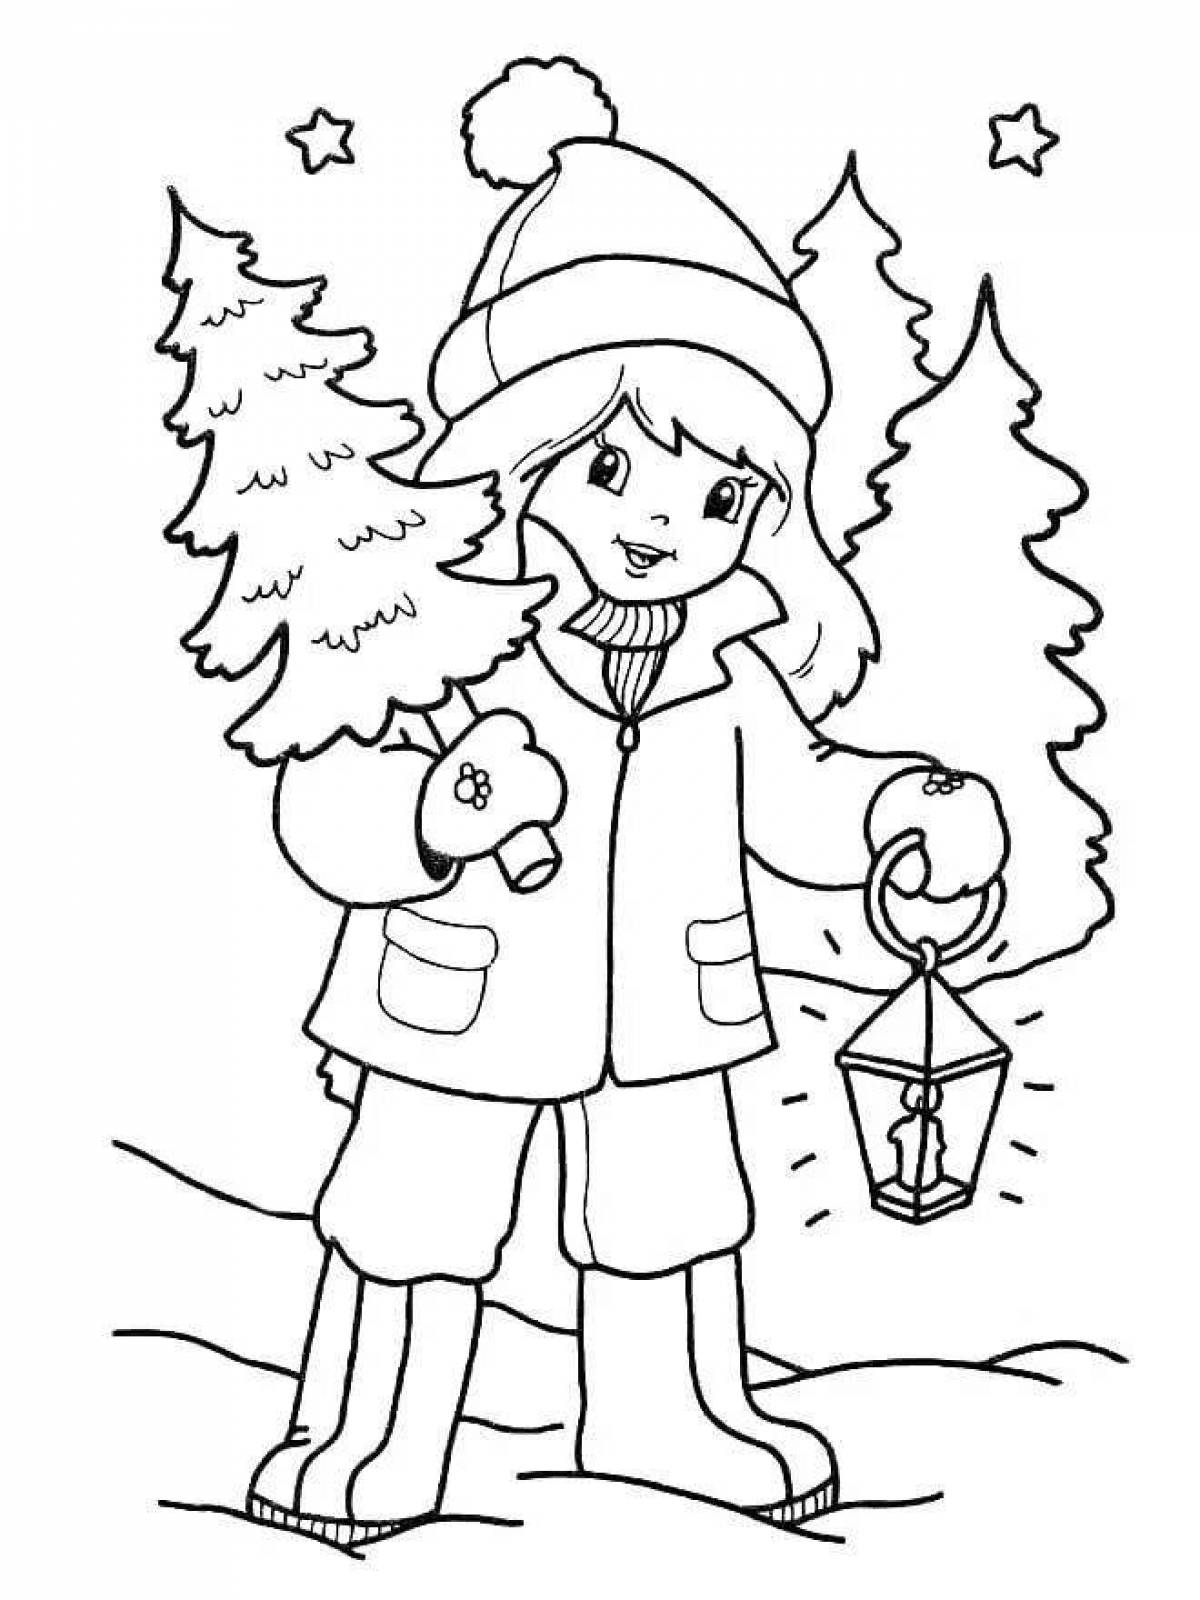 Bright Christmas coloring book for 6-7 year olds